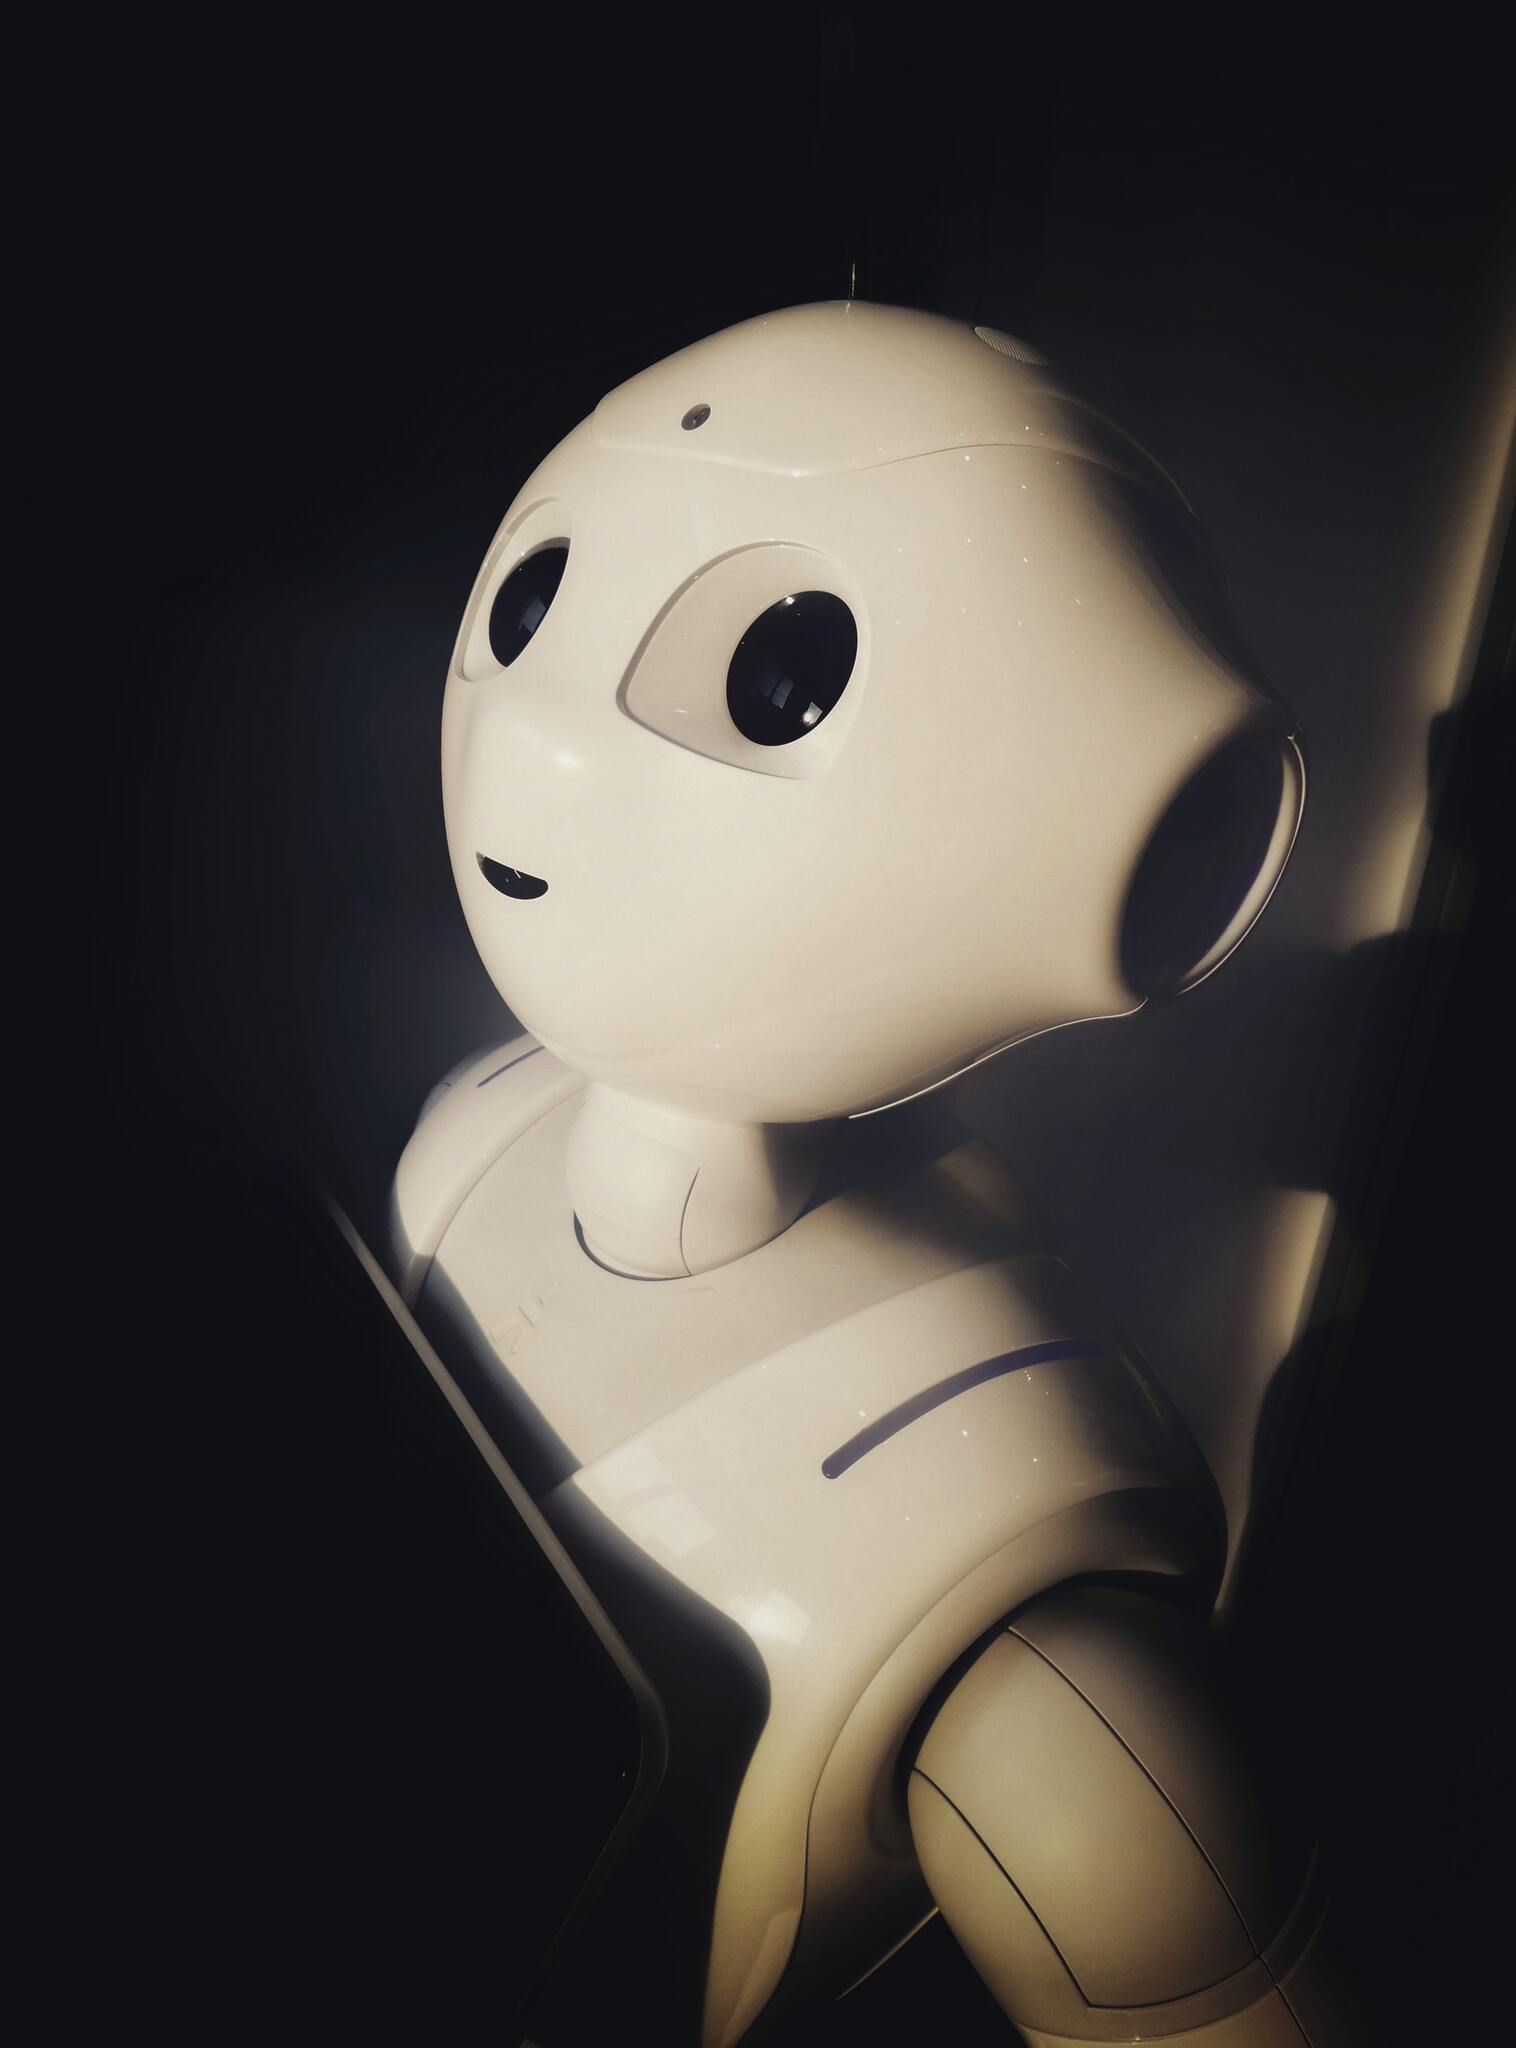 Image of Pepper the robot.